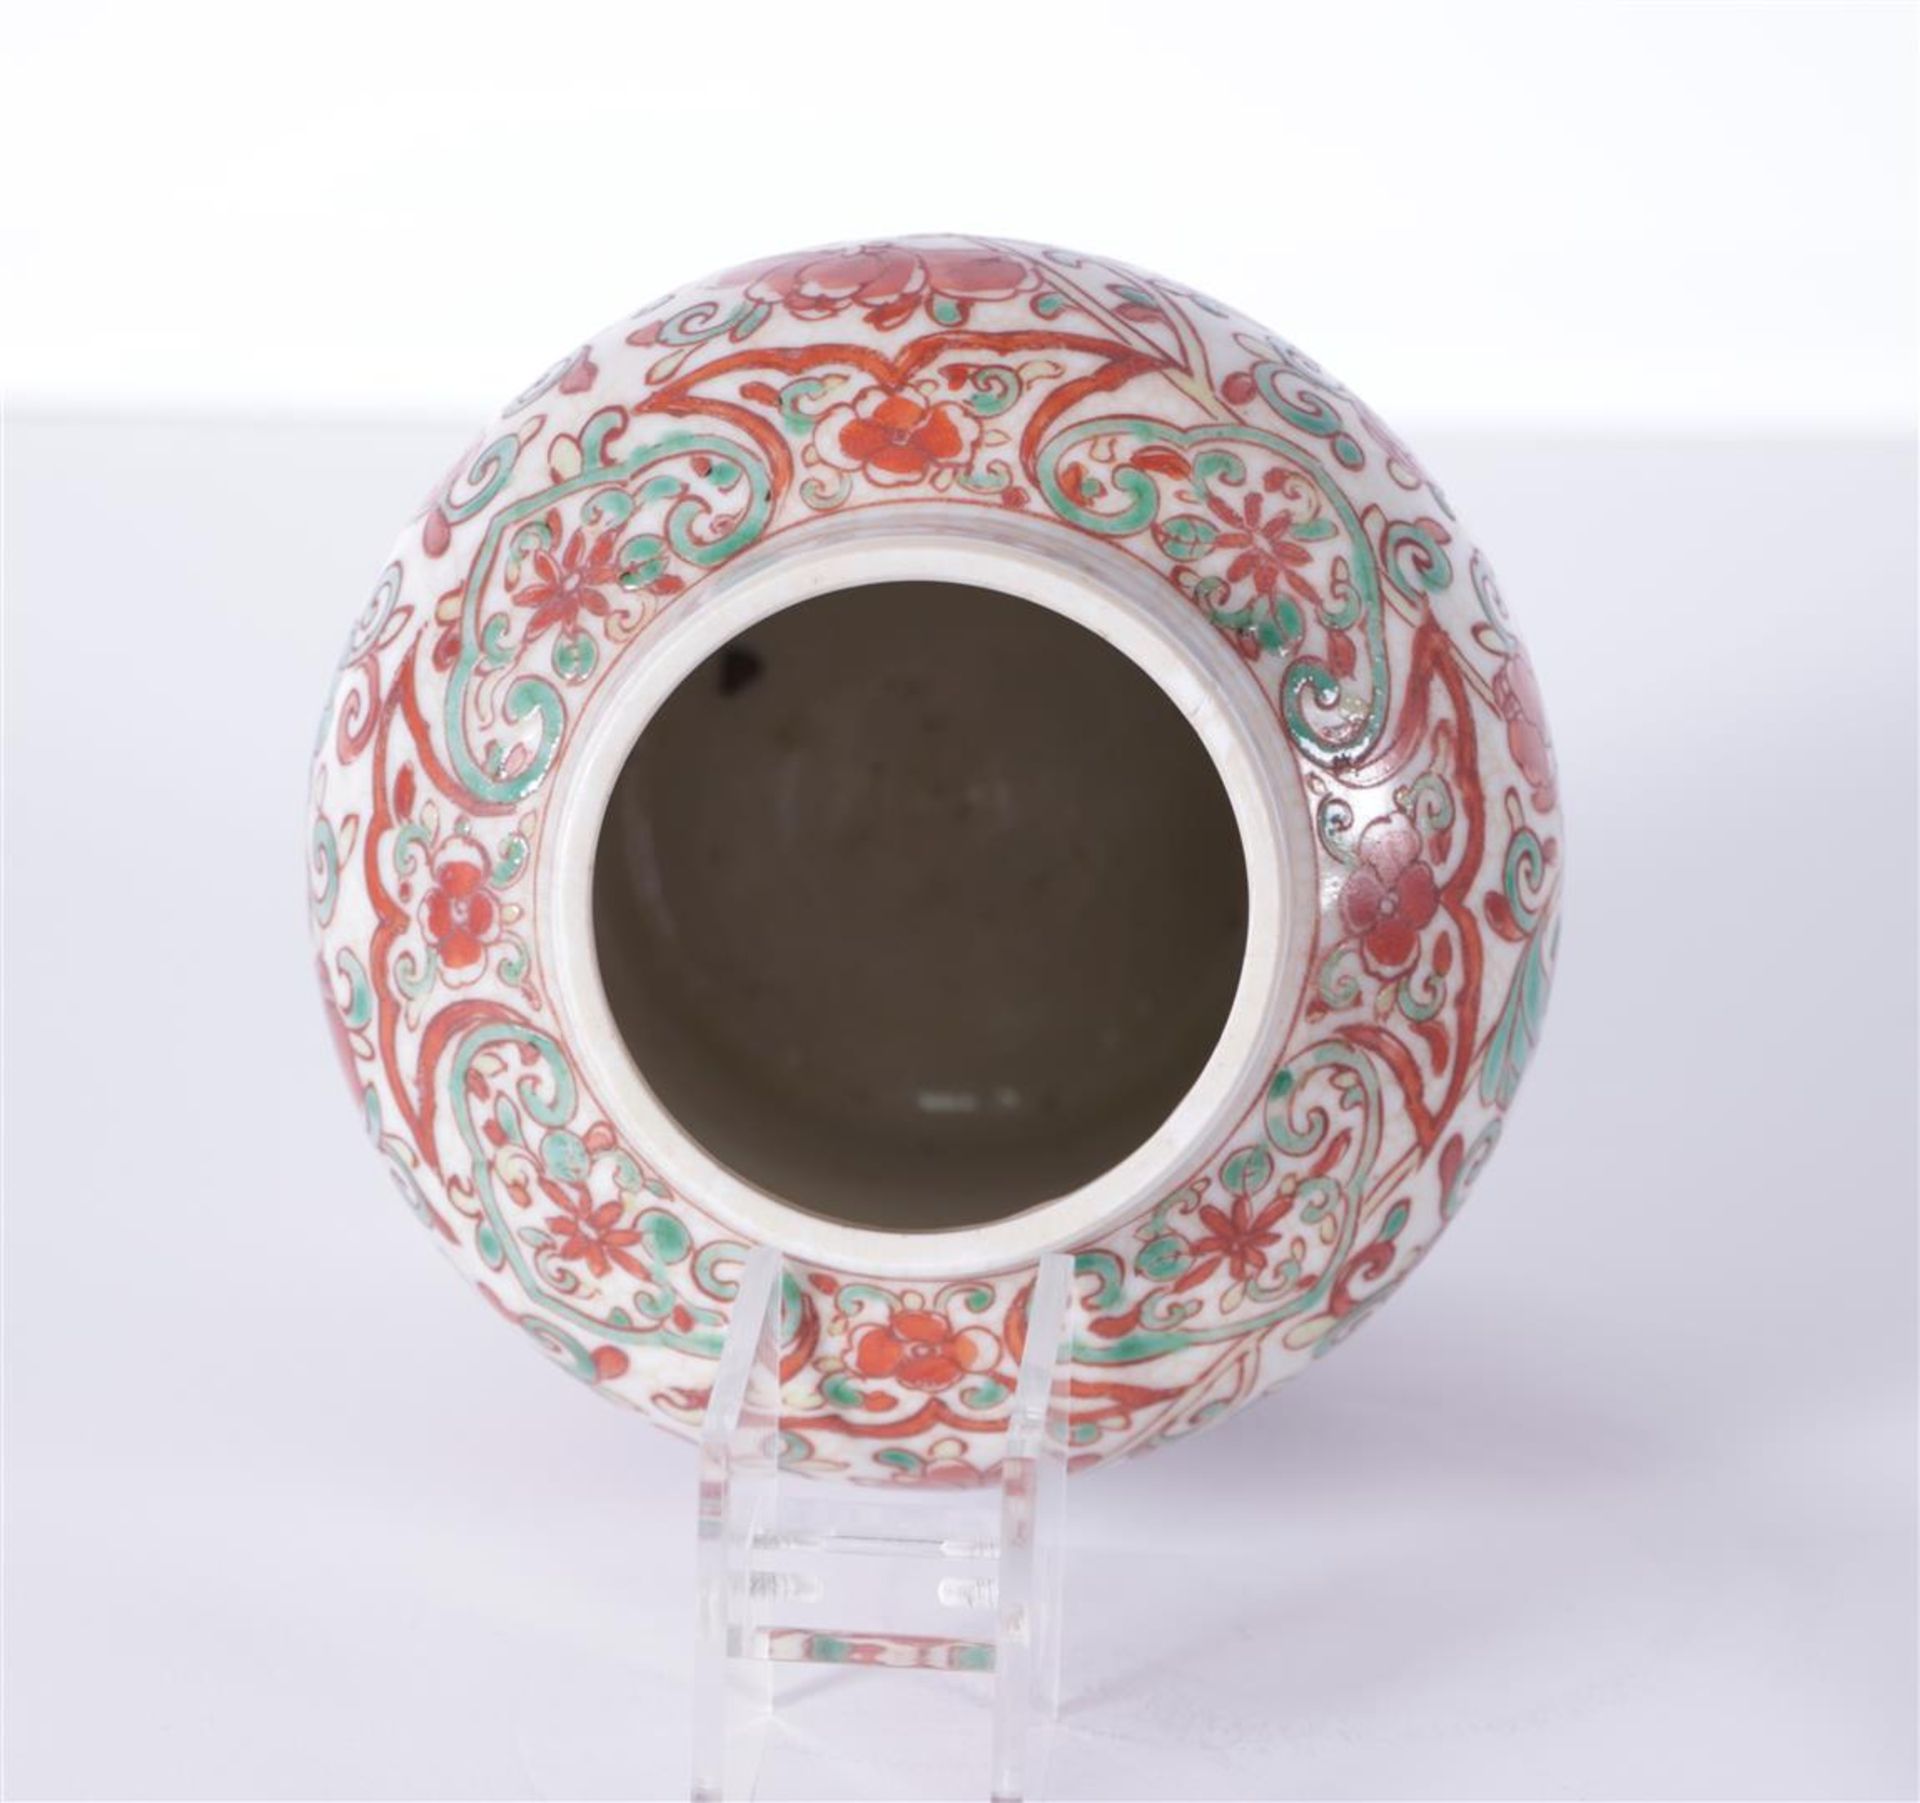 A porcelain lidded jar with floral decor, marked Kangxi. China, 19th century.
H. 25 cm. - Image 3 of 5